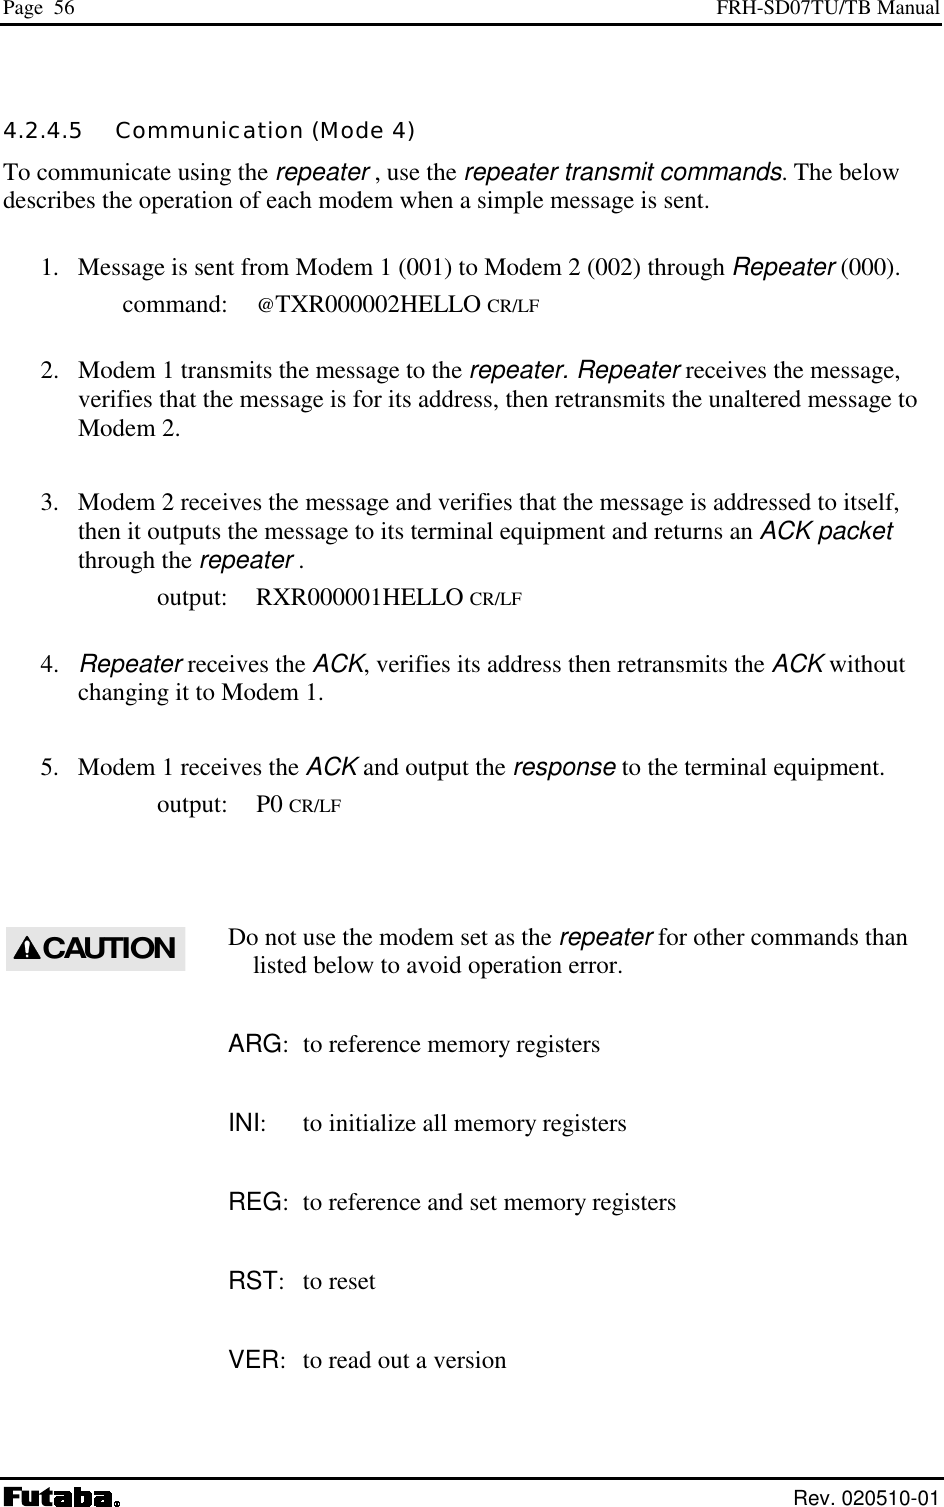 Page  56  FRH-SD07TU/TB Manual  Rev. 020510-01 4.2.4.5   Communication (Mode 4) To communicate using the repeater , use the repeater transmit commands. The below describes the operation of each modem when a simple message is sent.   1.  Message is sent from Modem 1 (001) to Modem 2 (002) through Repeater (000).  command: @TXR000002HELLO CR/LF   2.  Modem 1 transmits the message to the repeater. Repeater receives the message, verifies that the message is for its address, then retransmits the unaltered message to Modem 2.   3.  Modem 2 receives the message and verifies that the message is addressed to itself, then it outputs the message to its terminal equipment and returns an ACK packet through the repeater .  output: RXR000001HELLO CR/LF  4. Repeater receives the ACK, verifies its address then retransmits the ACK without changing it to Modem 1. 5.   Modem 1 receives the ACK and output the response to the terminal equipment.  output: P0 CR/LF  Do not use the modem set as the repeater for other commands than listed below to avoid operation error.  ARG:  to reference memory registers INI:  to initialize all memory registers REG:  to reference and set memory registers RST: to reset VER:  to read out a version  CAUTION